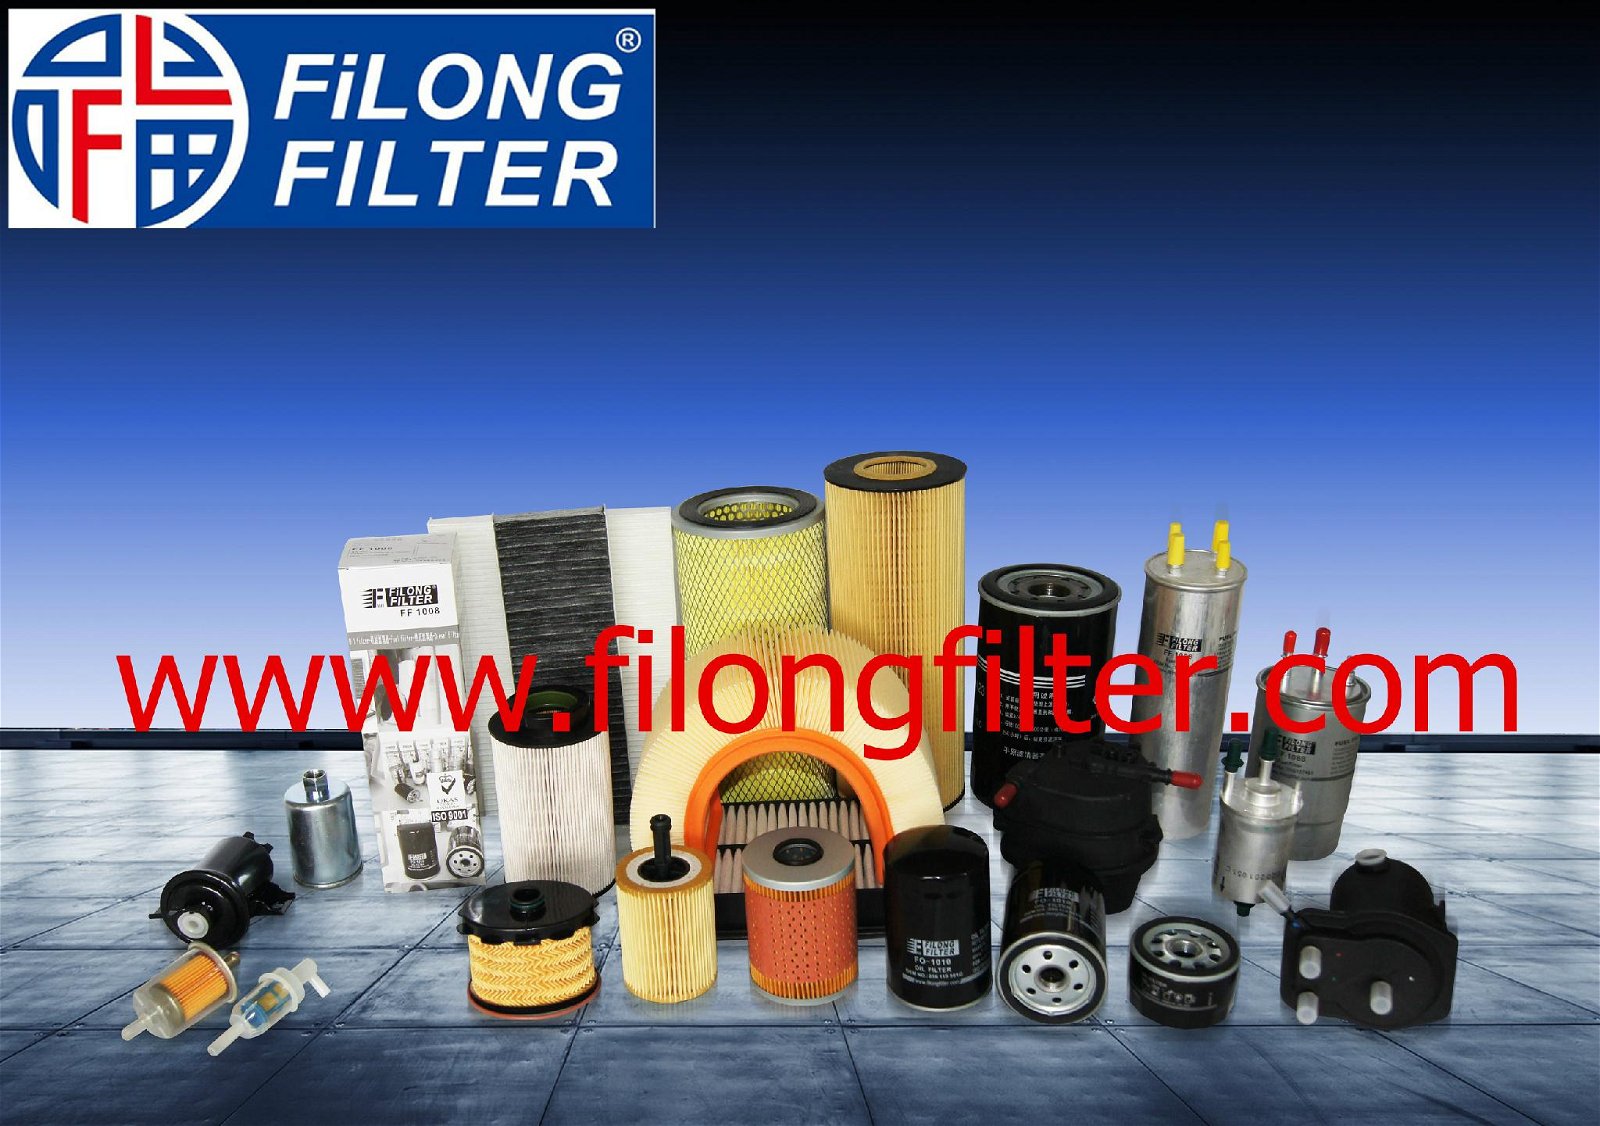 W920/21 PH2809 5940899 60507080 4158728 4286050 FILONG Filter FO4001 for FIAT 5